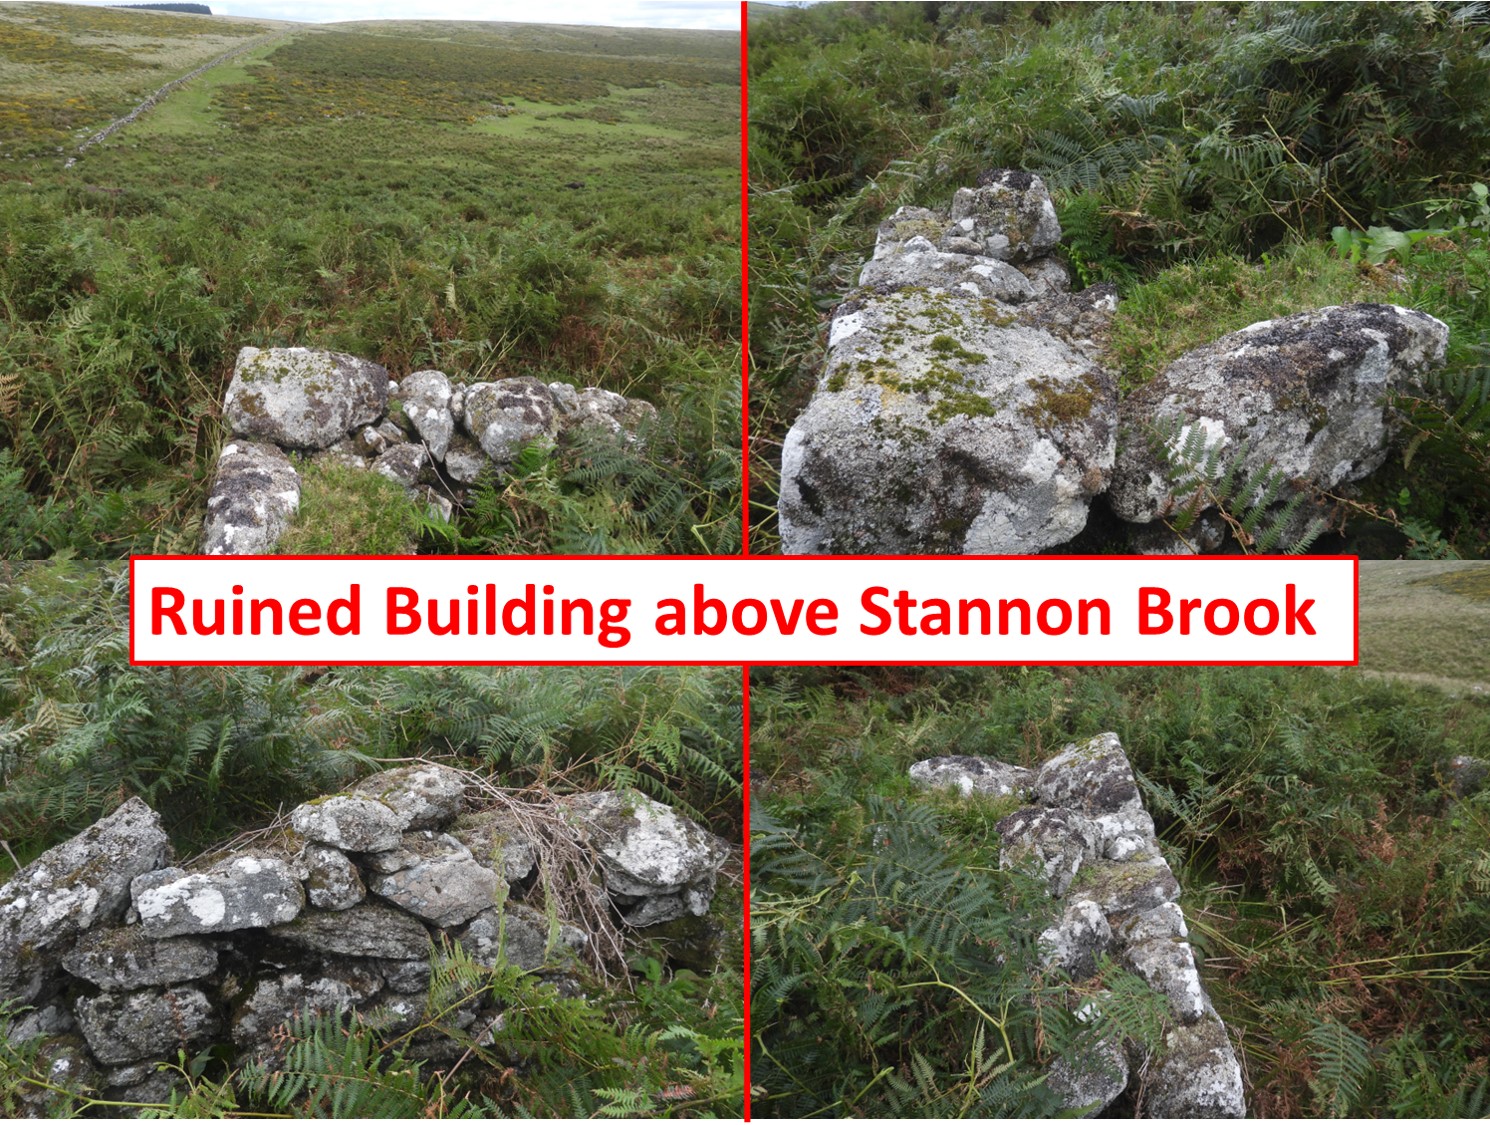 15. Ruined Building above Stannon Brook a